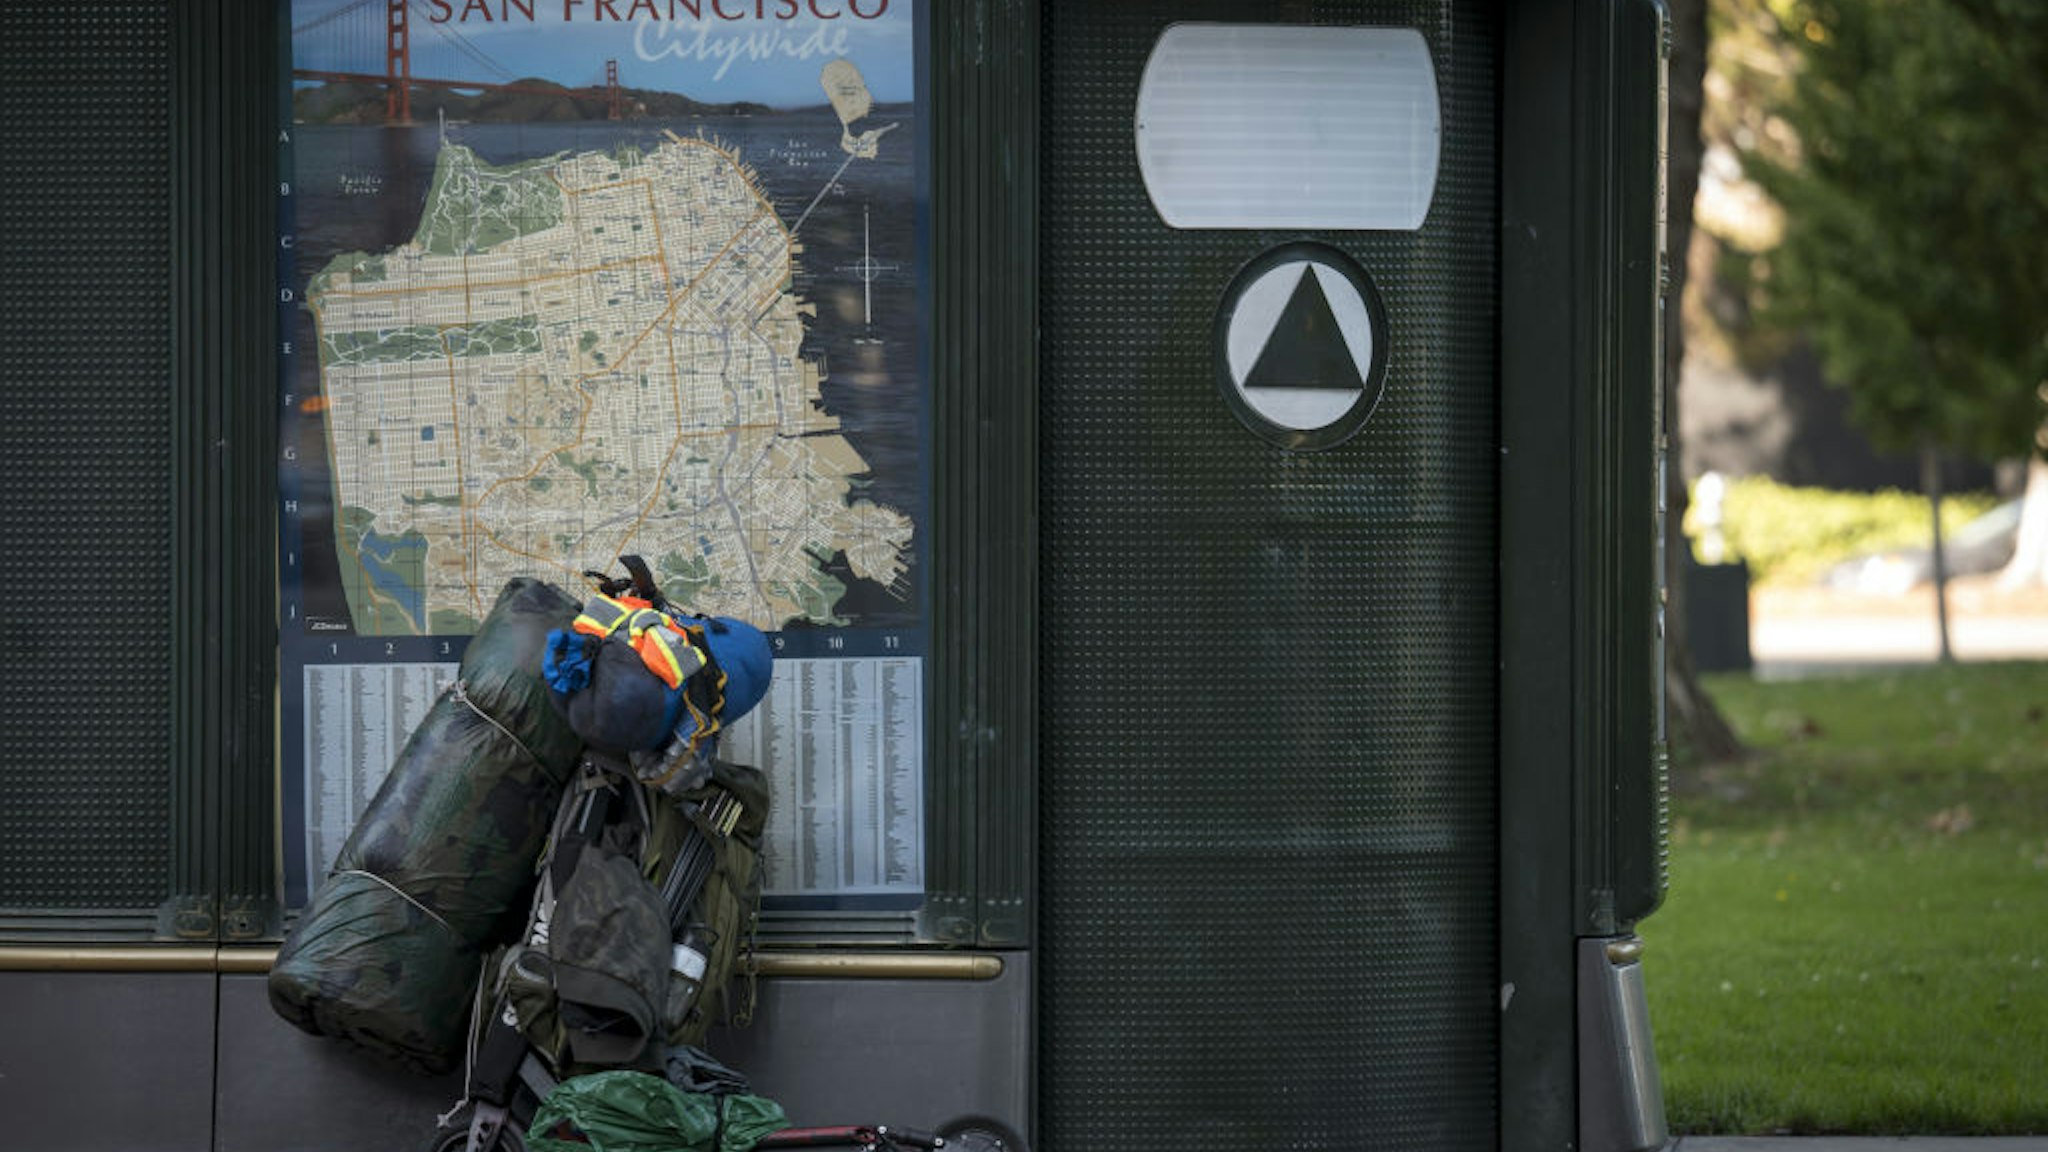 A scooter loaded with personal items stands against a public toilet in San Francisco, California, U.S., on Monday, Oct. 14, 2019.